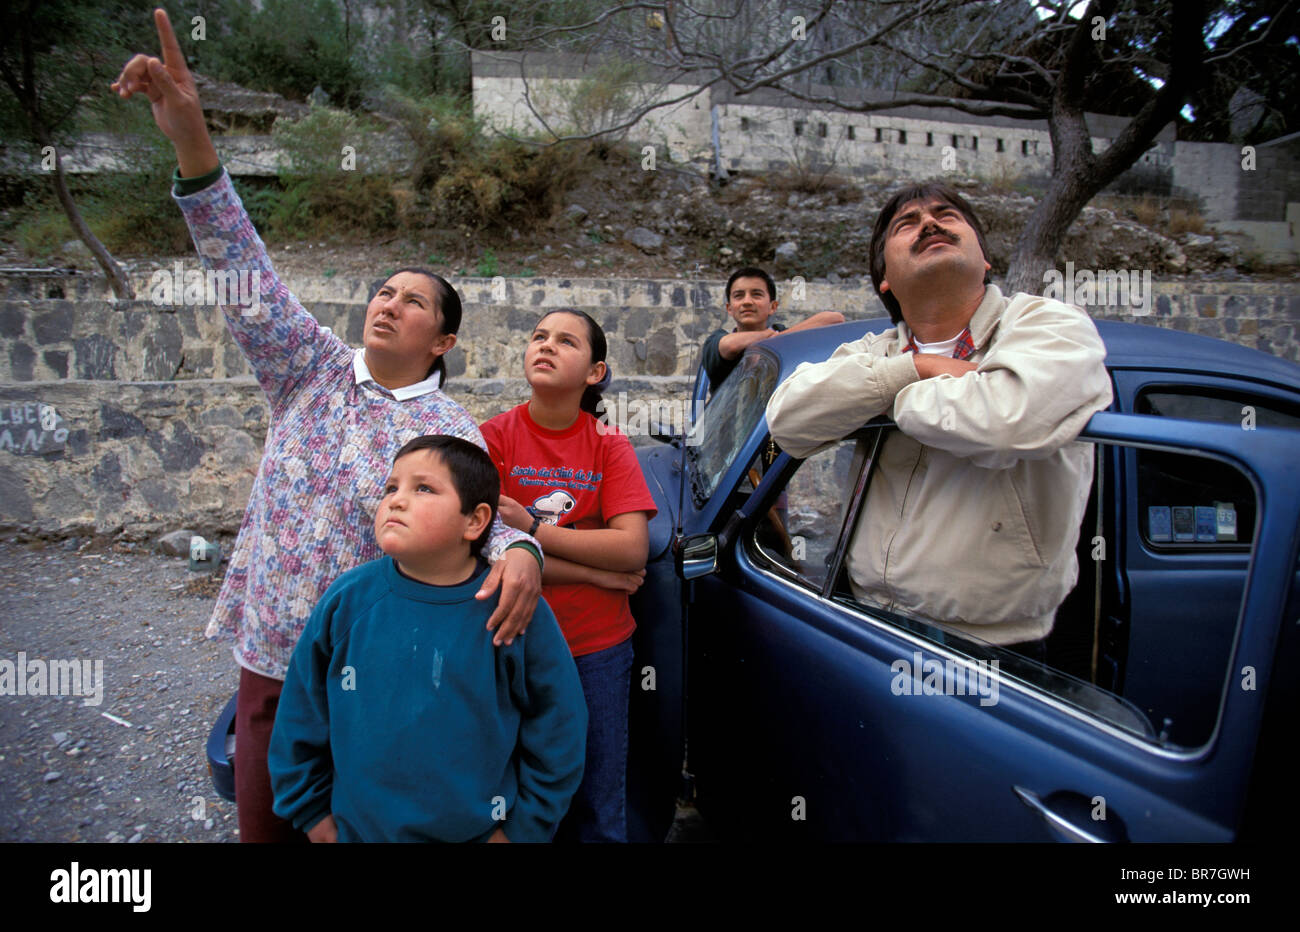 Local villagers look up and point as they watch climbers at El Potrero Chico Mexico. Stock Photo